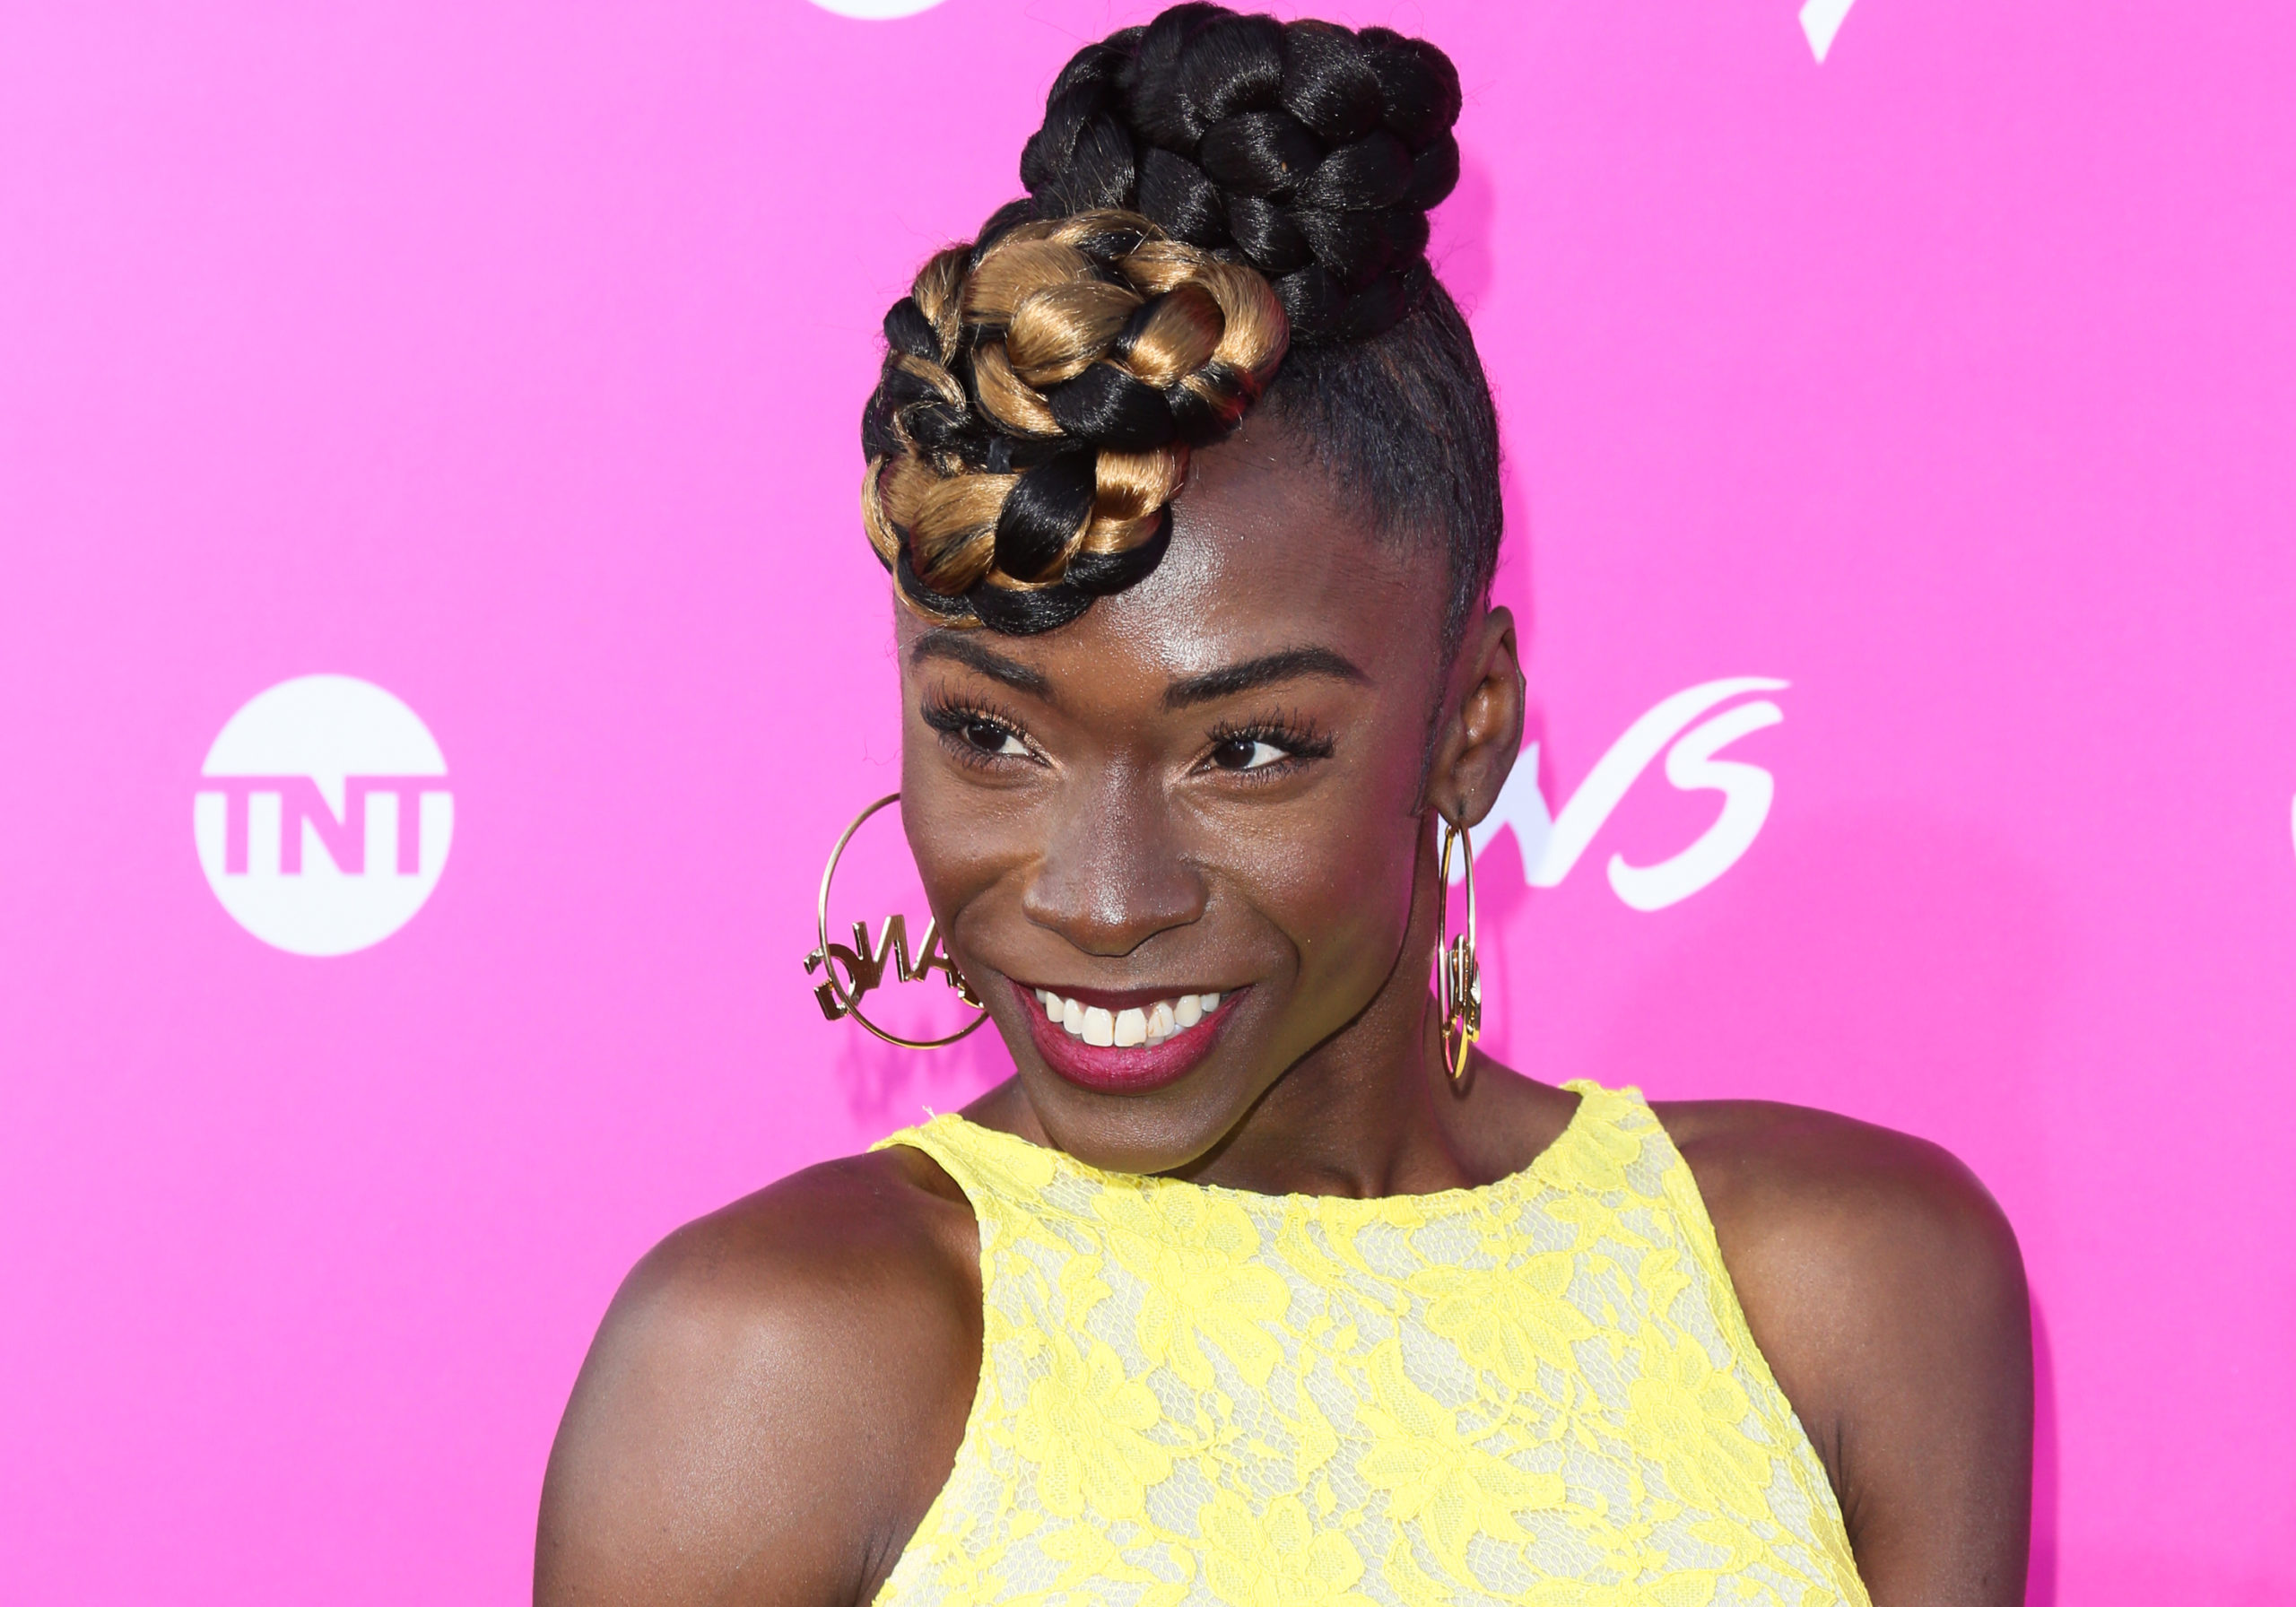 Pose: Actress Angelica Ross attends the premiere of TNT's Claws at Harmony Gold Theatre on June 1, 2017 in Los Angeles, California.